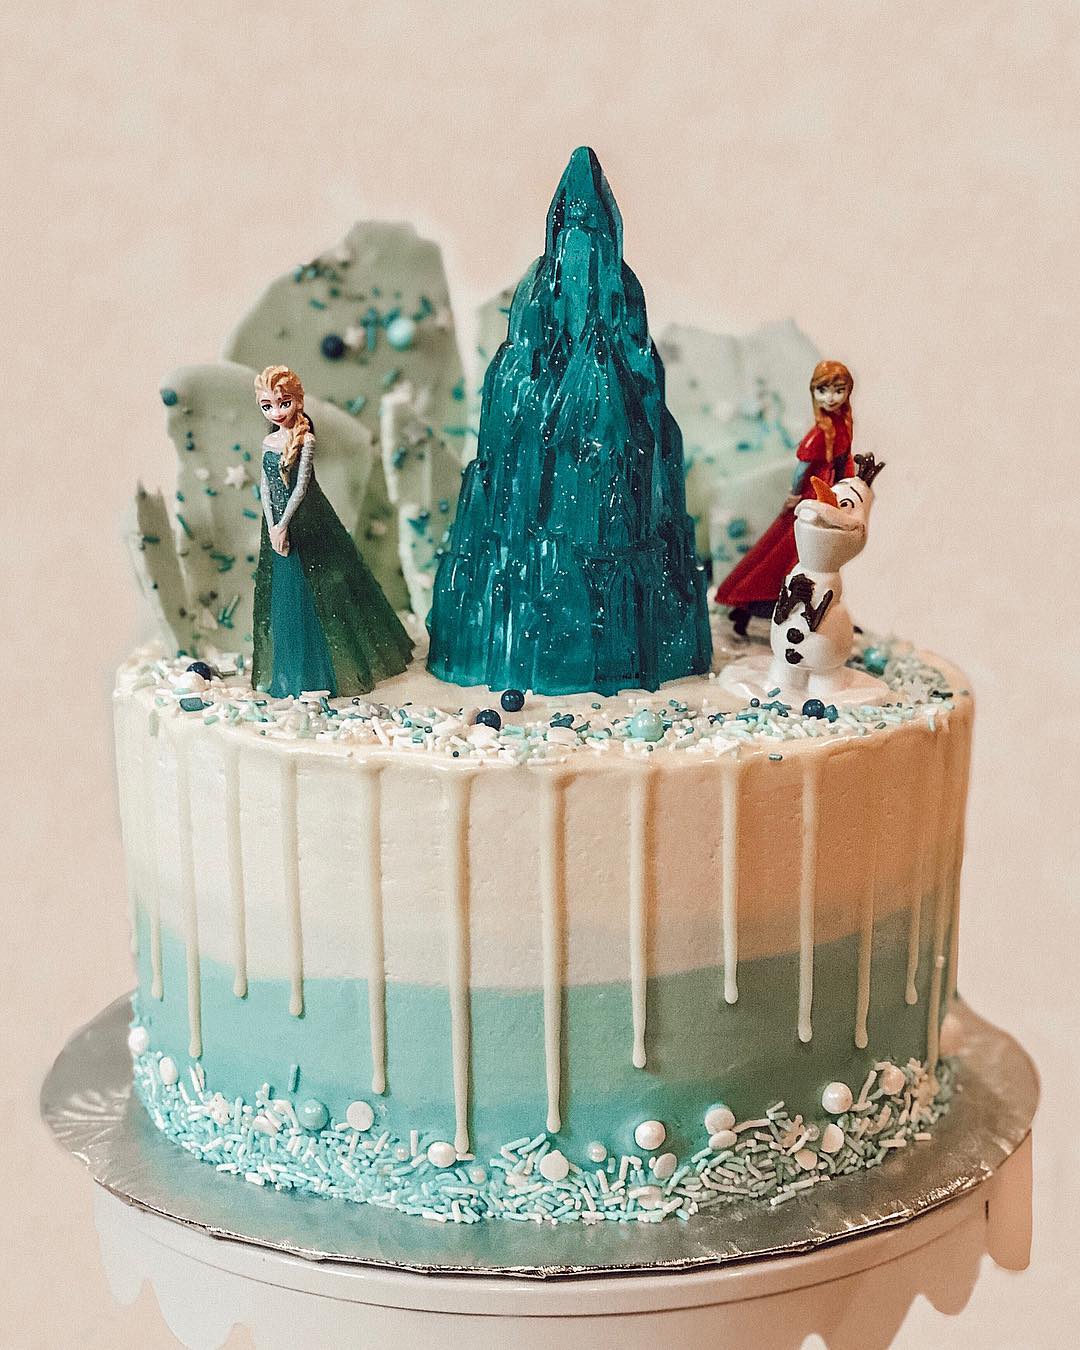 Elsa & Olaf “Frozen” Cake | Cakes by Caralin